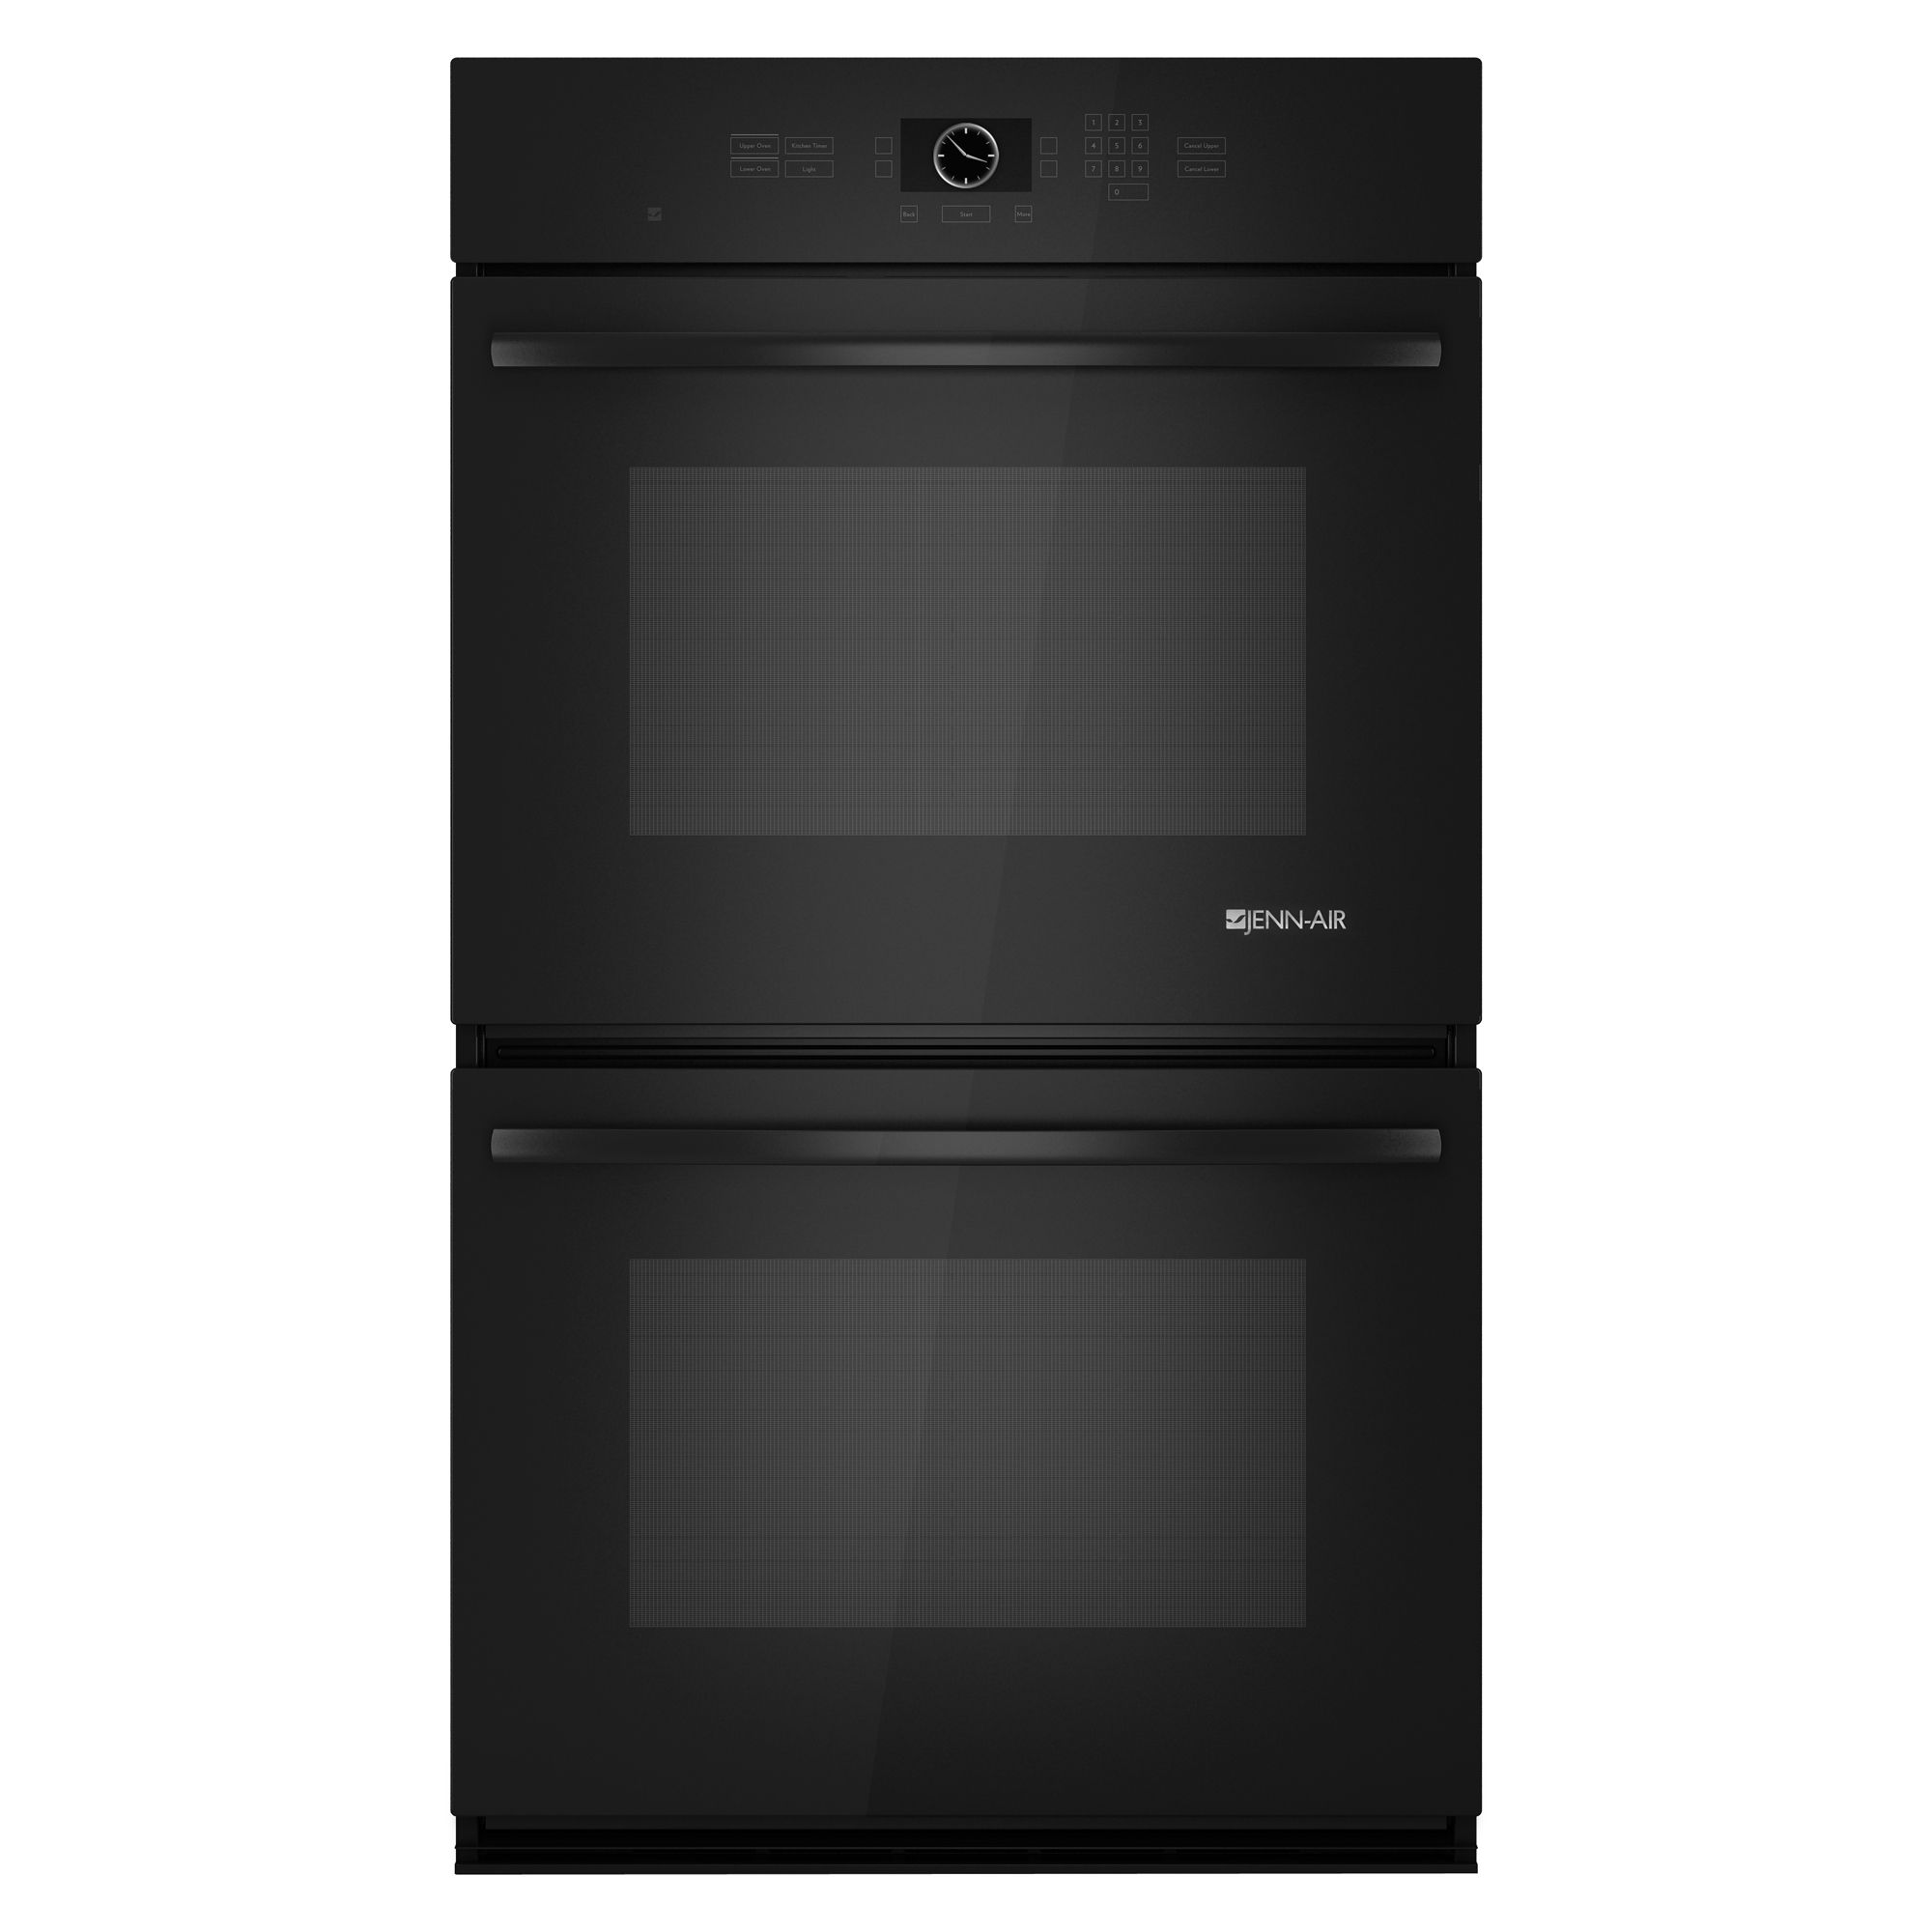 Jenn-Air JJW2830WB 30" Double Electric Wall Oven w/ Convection